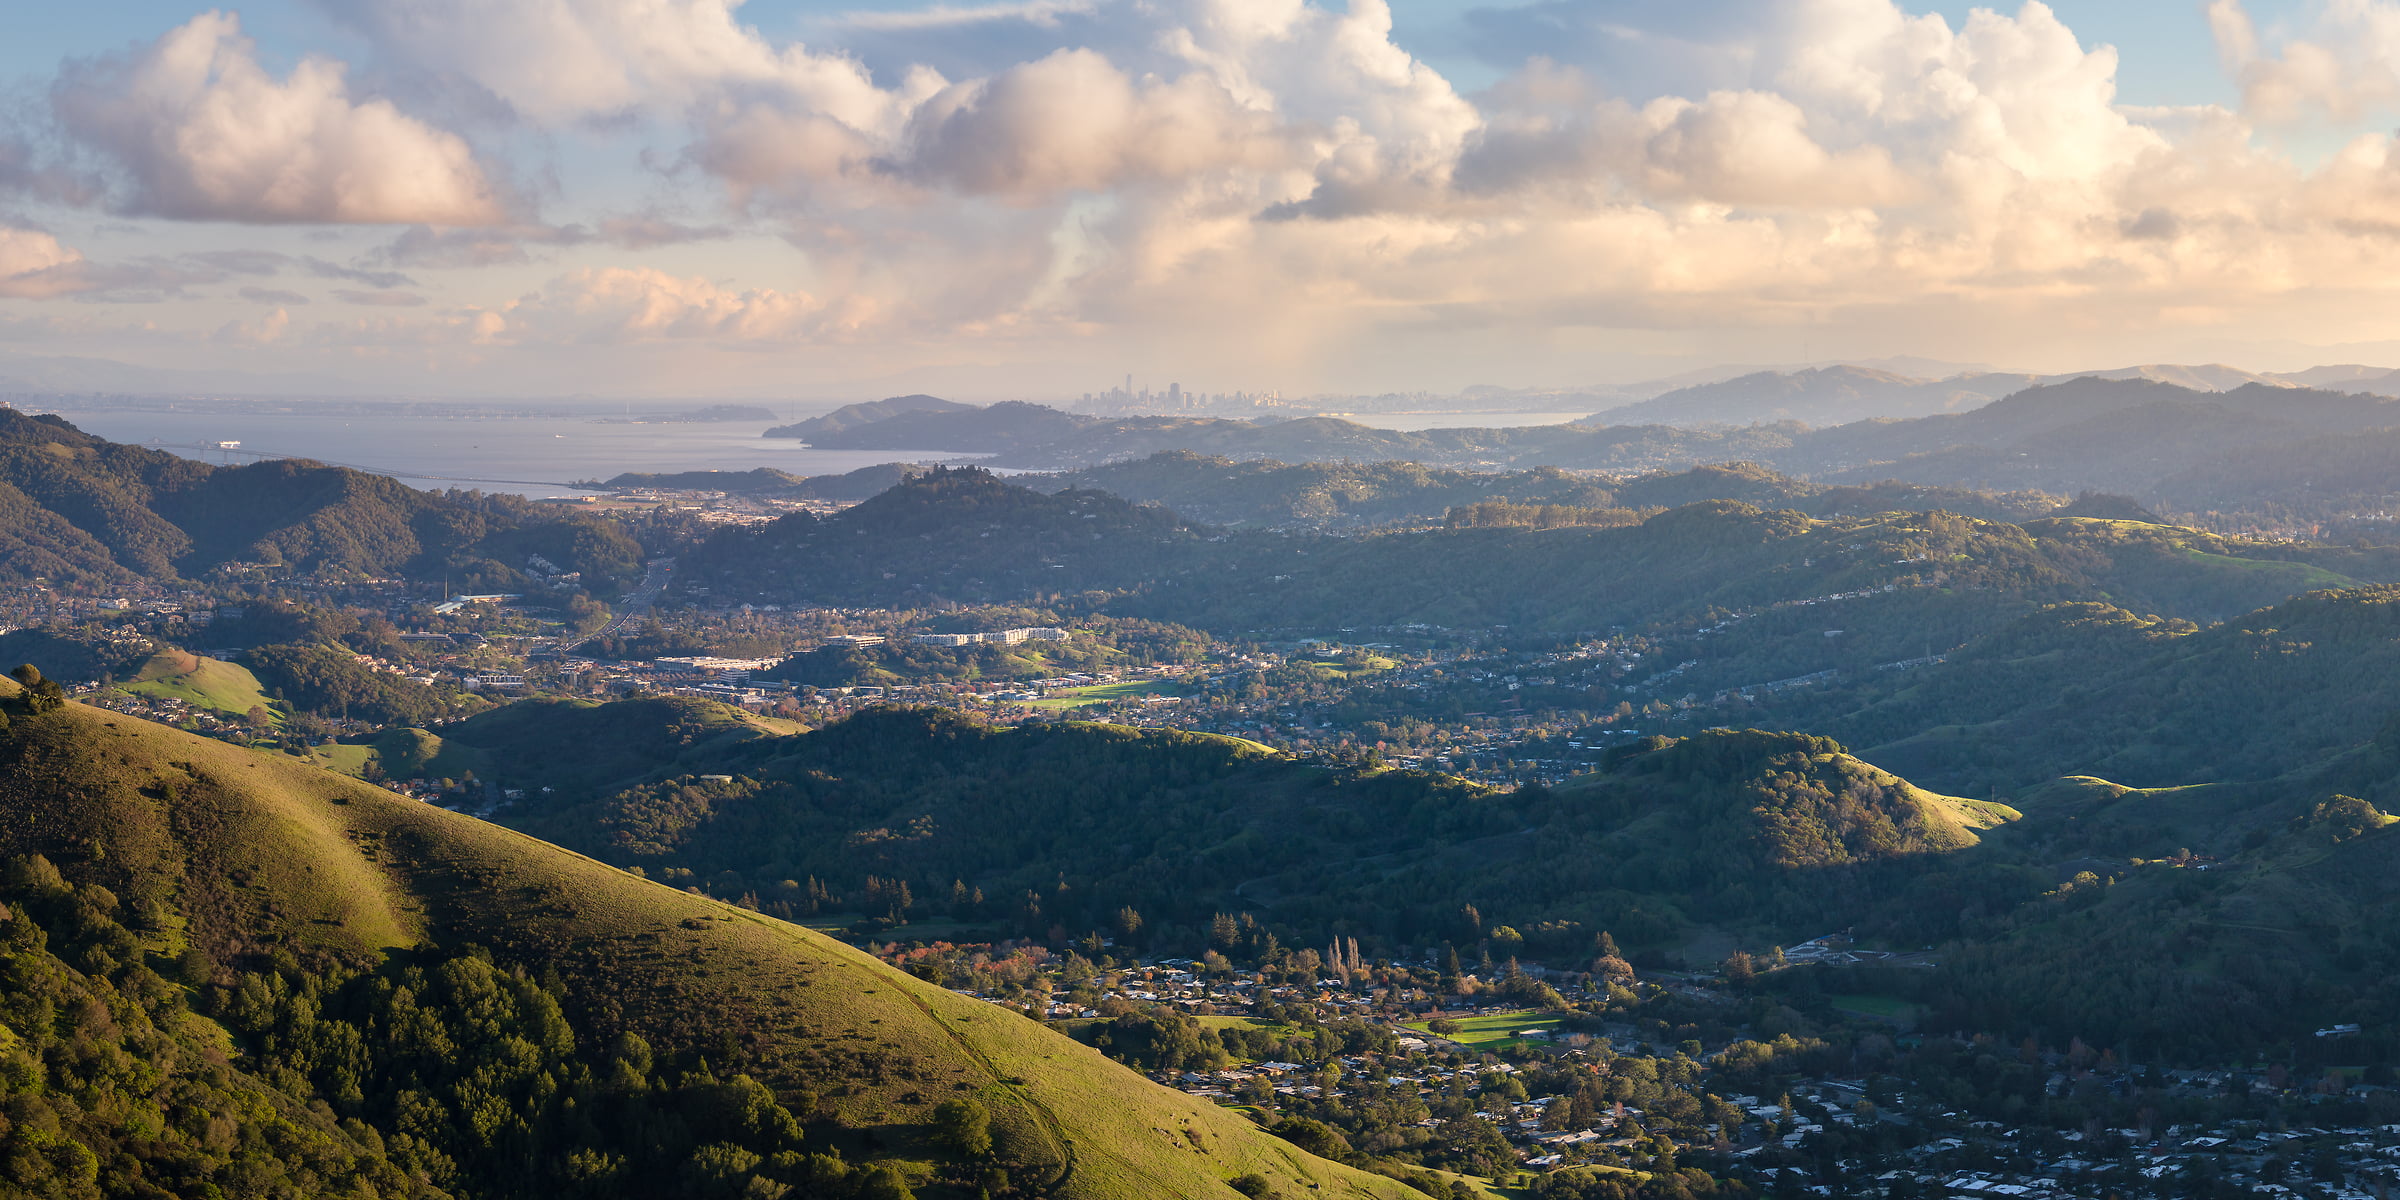 142 megapixels! A very high resolution, large-format VAST photo print of a Marin County landscape; art photograph created by Jeff Lewis in Marin County, California.